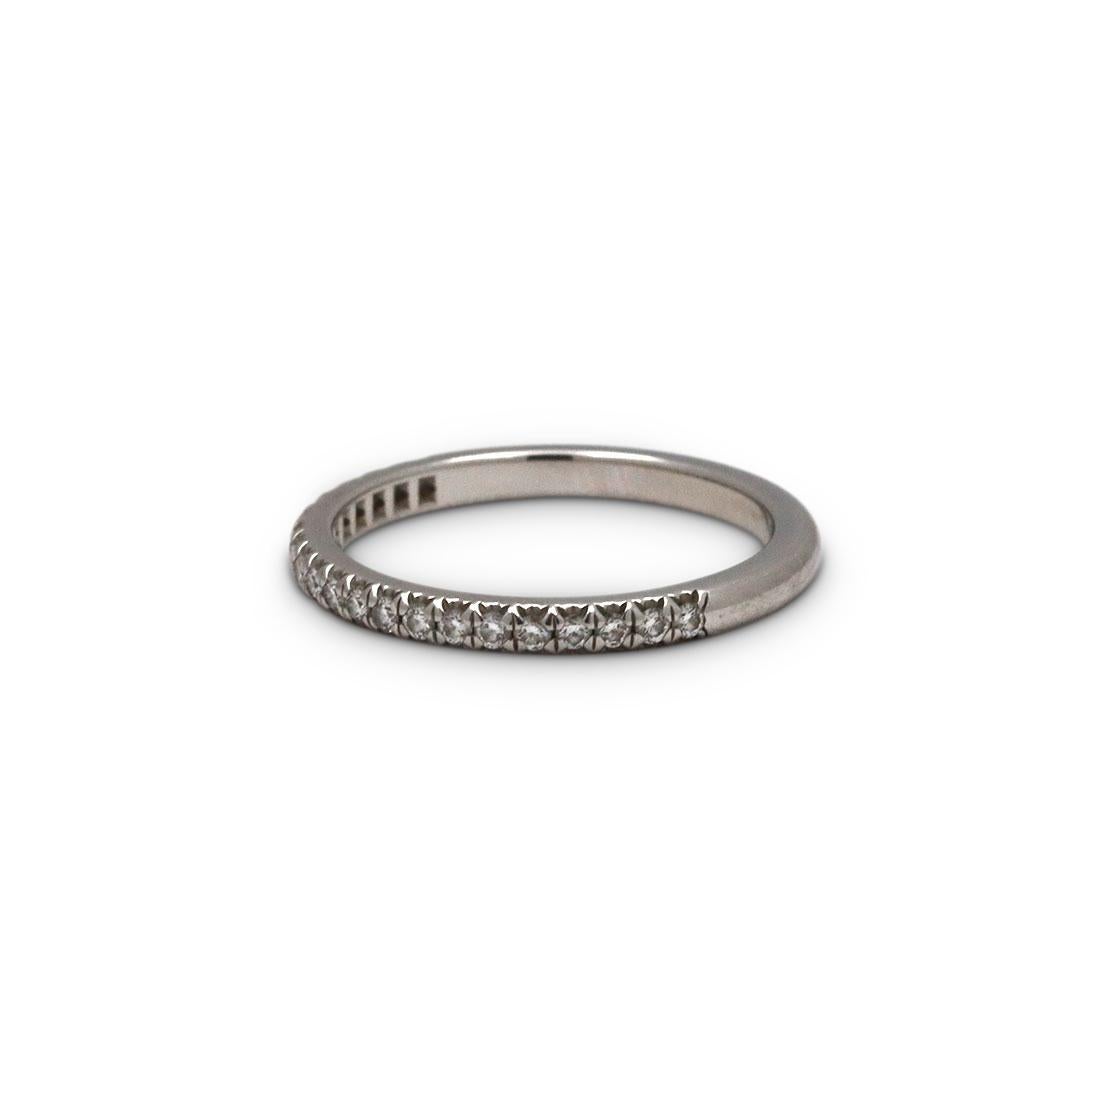 Authentic Tiffany & Co. 'Soleste' Half Eternity band crafted in platinum and set with approximately 0.17 carats of glittering round brilliant cut diamonds on half of the band. US Size 5 1/4. Signed Tiffany & Co., PT950. The ring is not presented